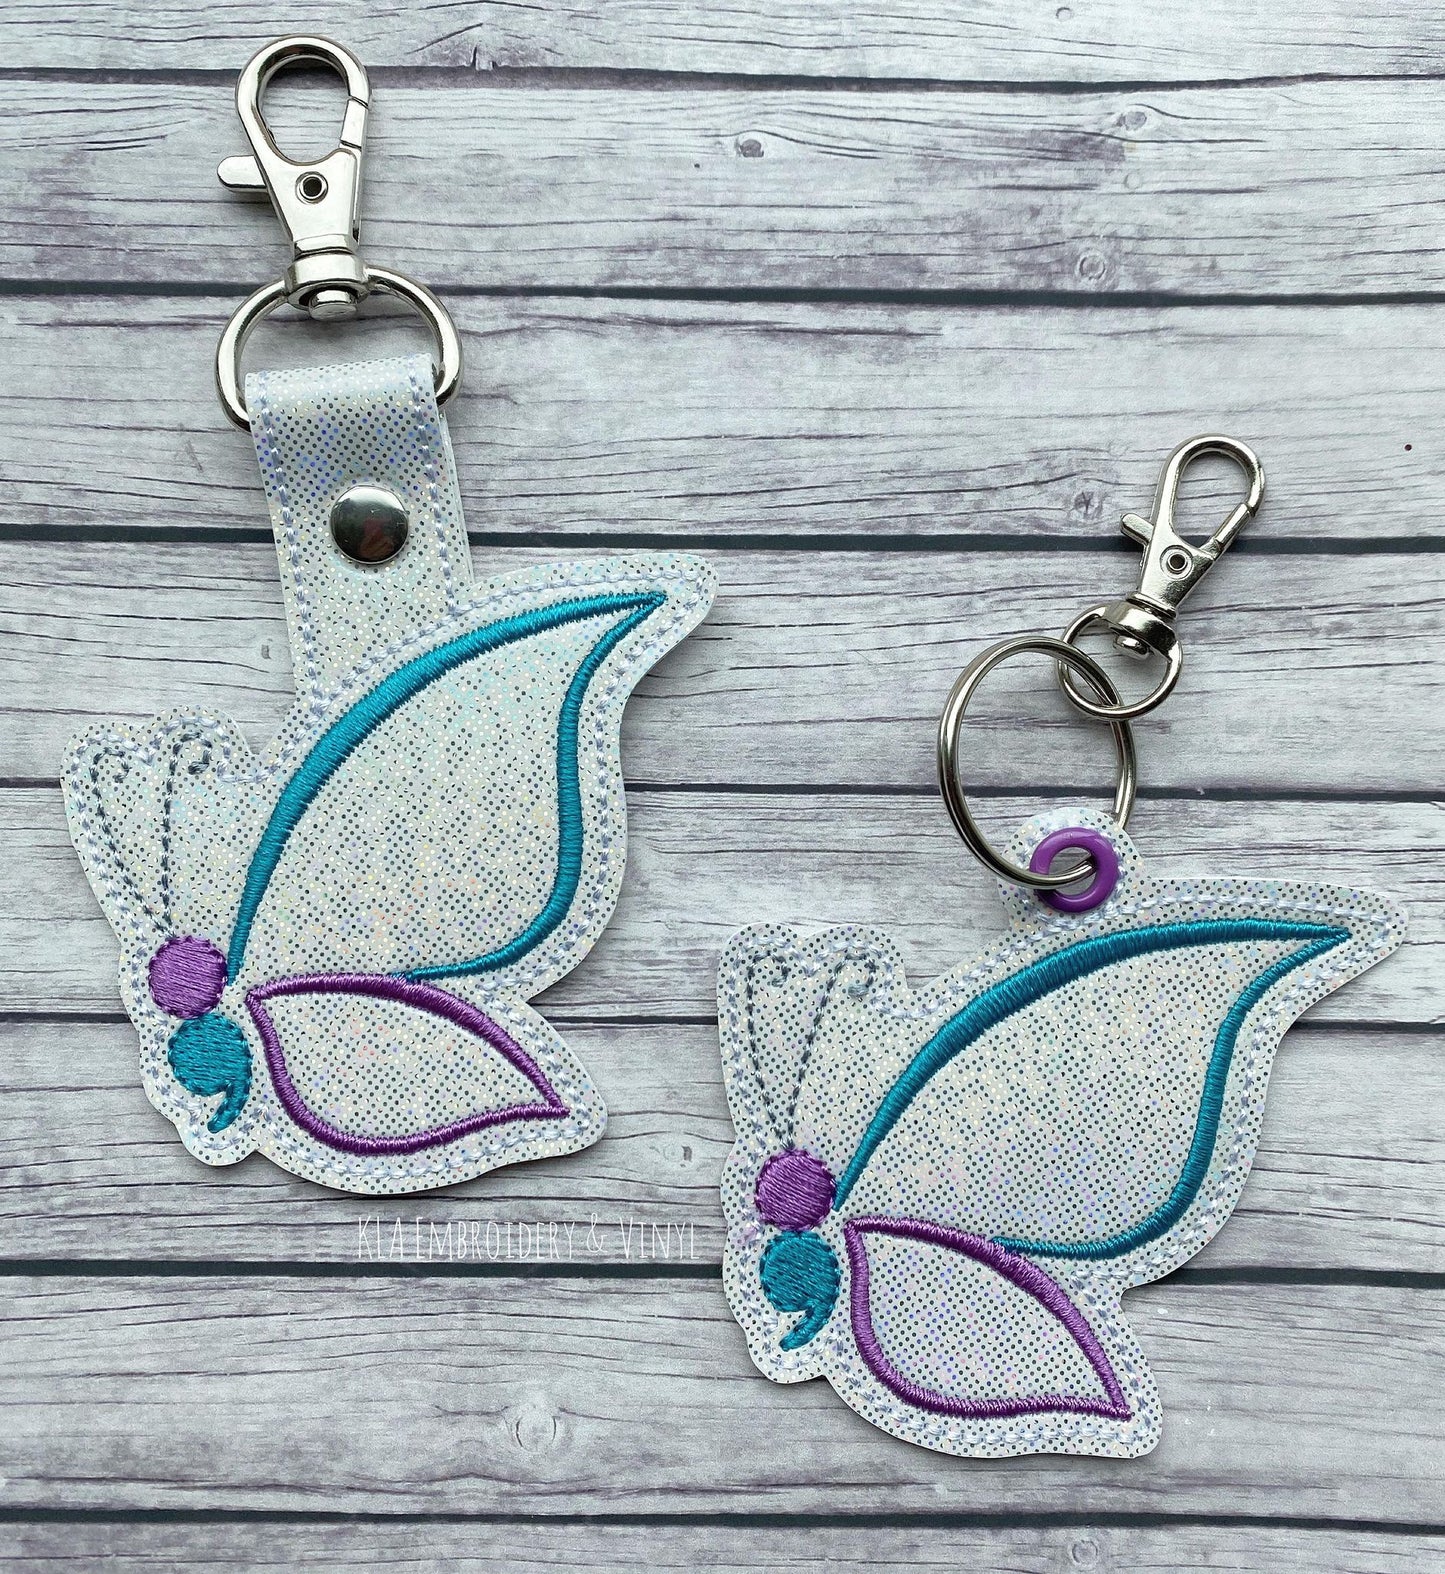 Semi Colon Butterfly Fobs - DIGITAL Embroidery DESIGN